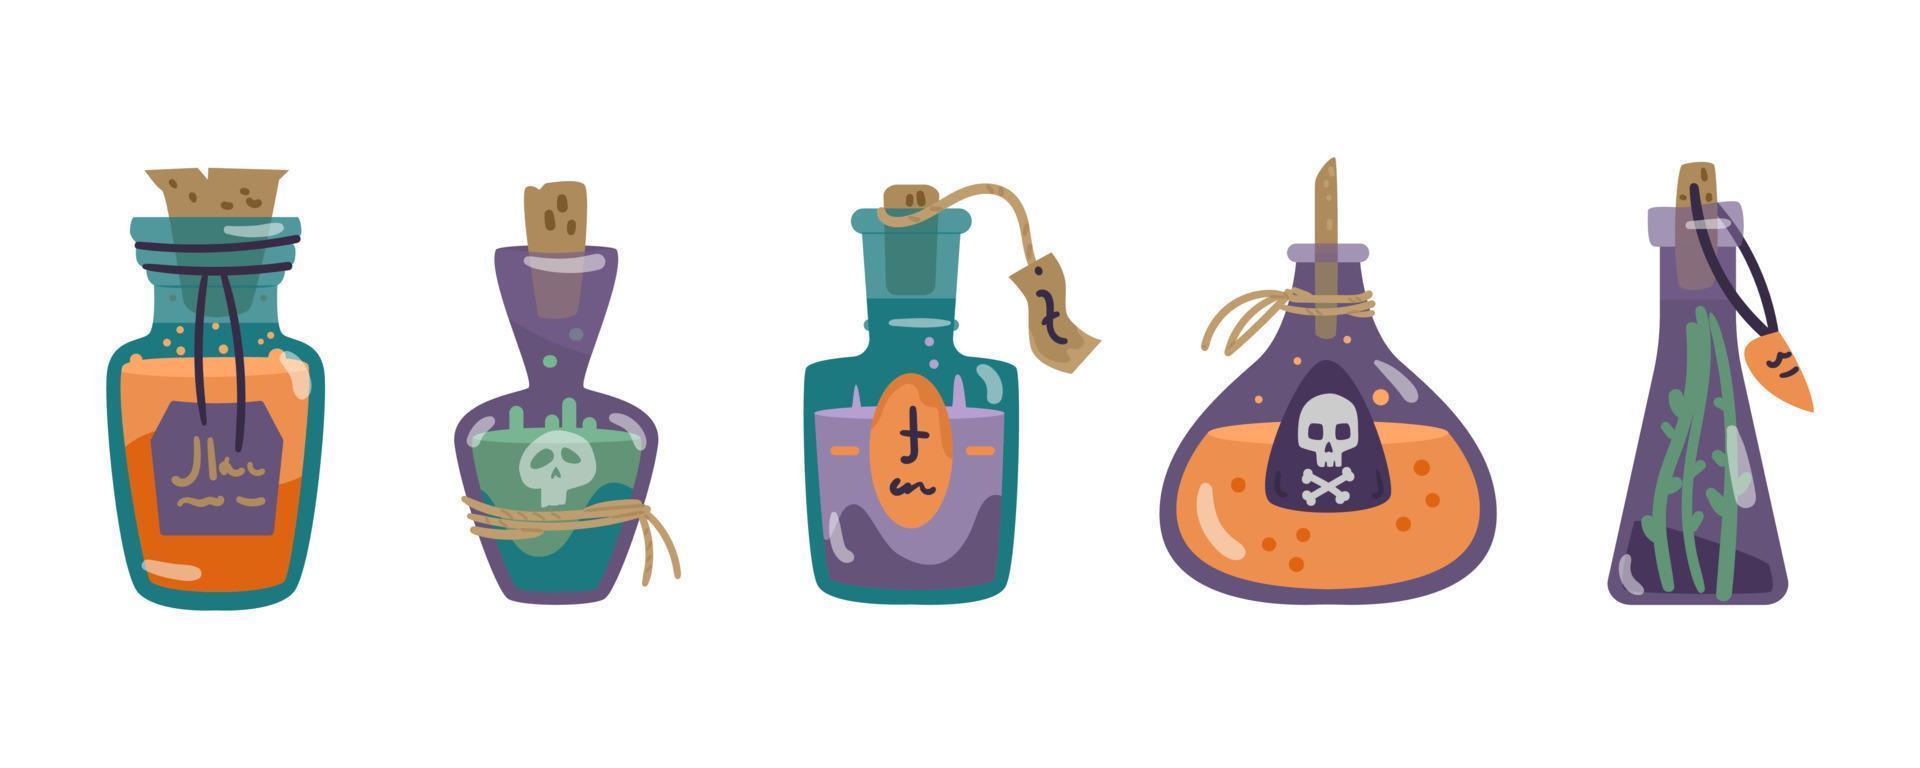 Magic potions in different glass bottles vector set.